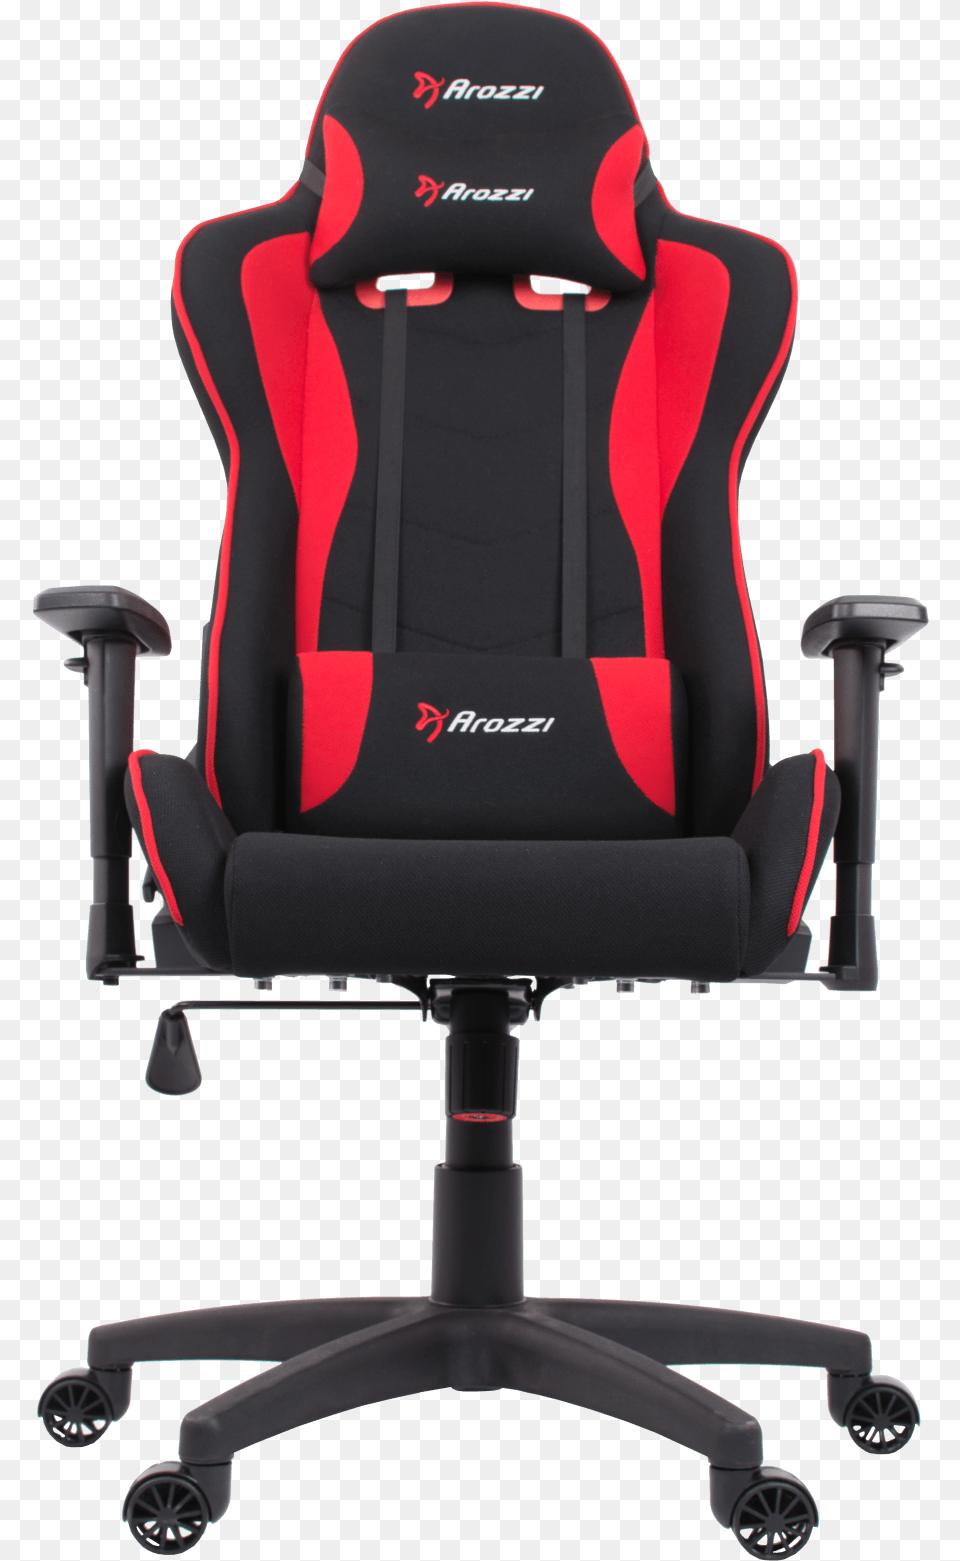 Gaming Chair Price In Pakistan, Cushion, Home Decor, Headrest, Furniture Png Image